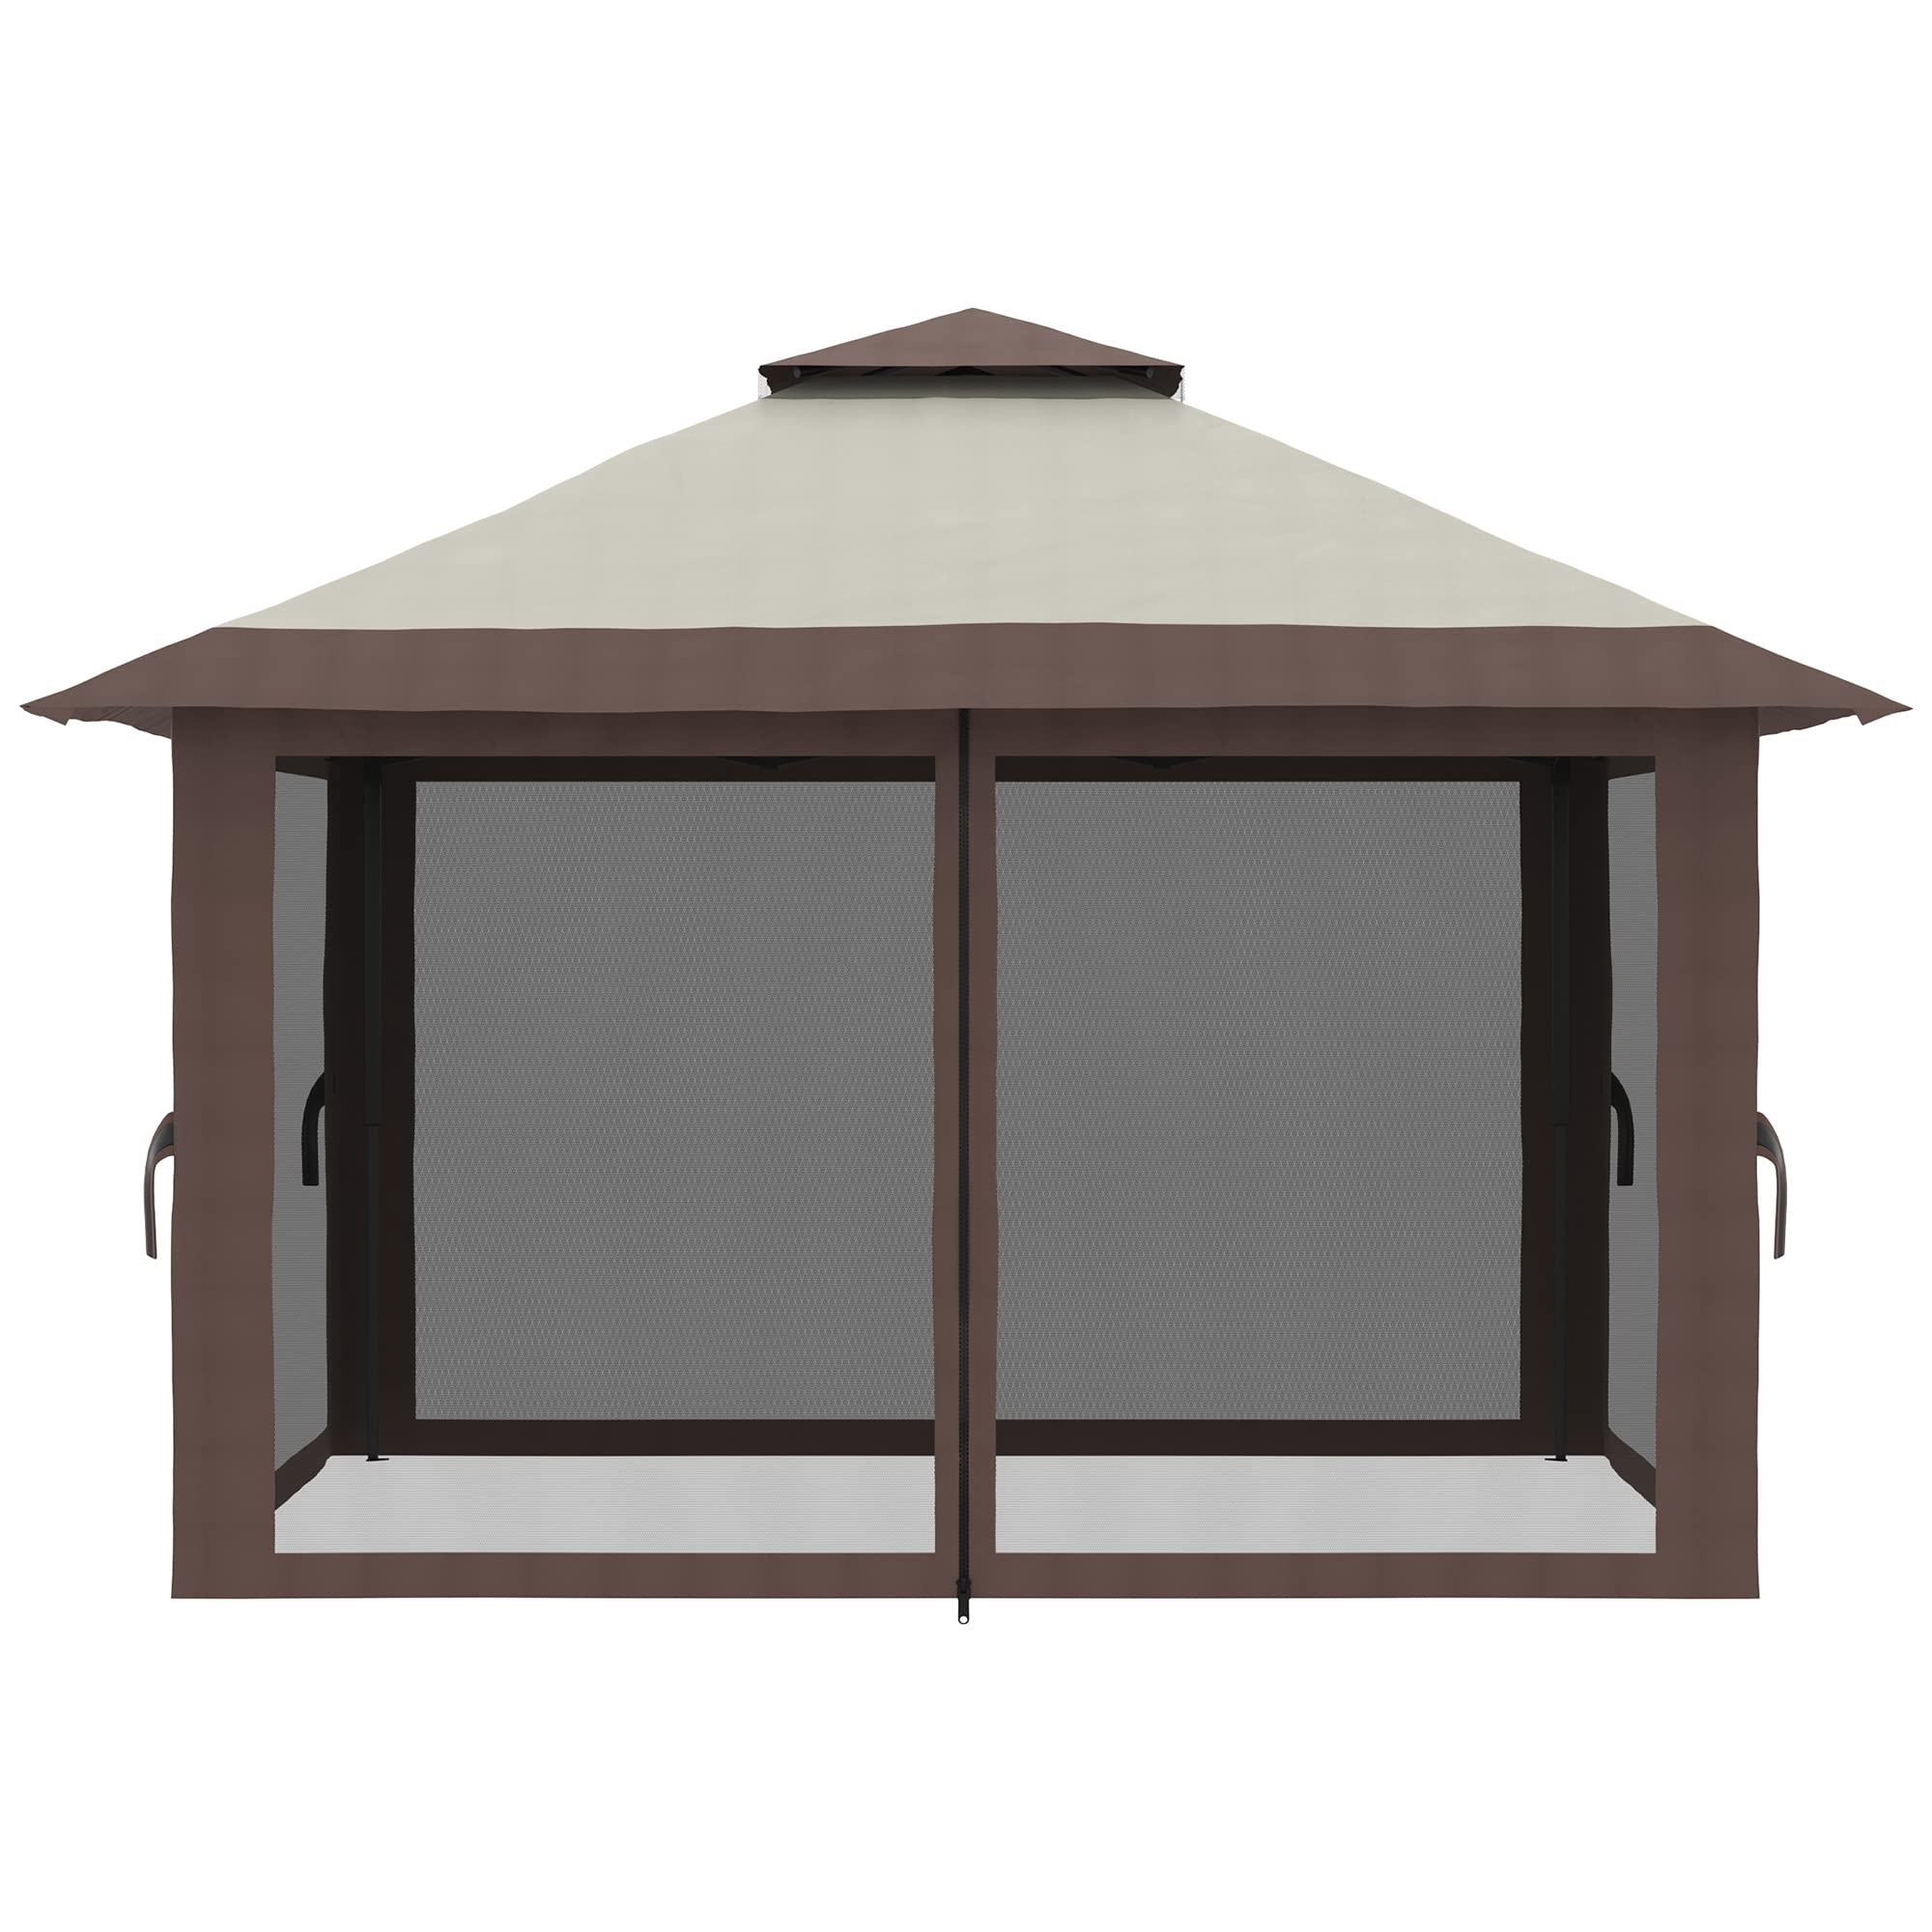 Outsunny 13' x 13' Pop Up Gazebo with Netting, Instant Canopy Tent Shelter with 2-Tier Roof, Wheeled Carry Bag, Water/Sand Bags for Outdoor, Garden, Parties, Beige